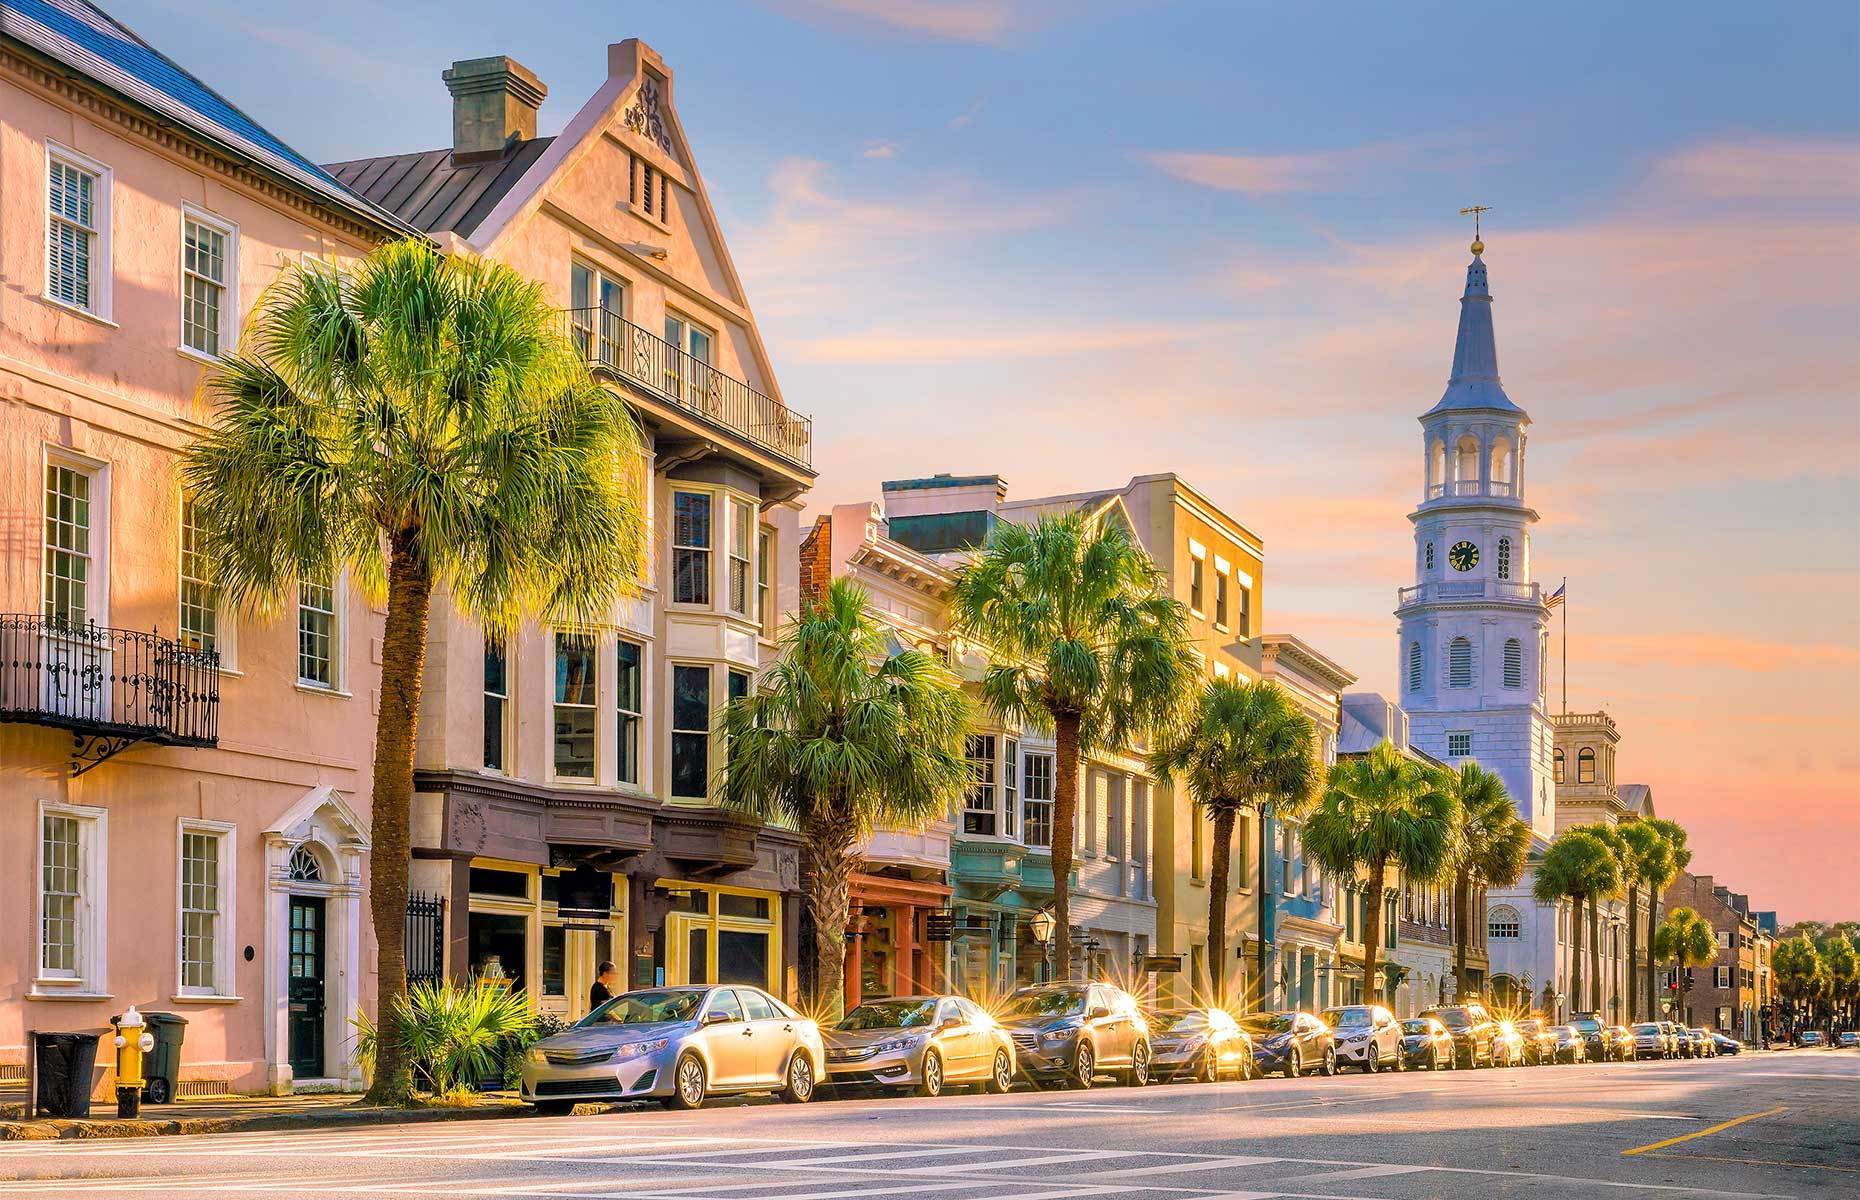 <p class="p1"><span>One glimpse of the palm-lined streets will confirm that you are well and truly in the South. Treat yourself to the flavours, traditions, history, and art of Charleston. Creative travellers will want to stay for at least three days to complete this <a href="https://www.charlestoncvb.com/itineraries/artsy-adventure/" rel="noreferrer noopener"><span>art-filled itinerary</span></a>.</span></p>